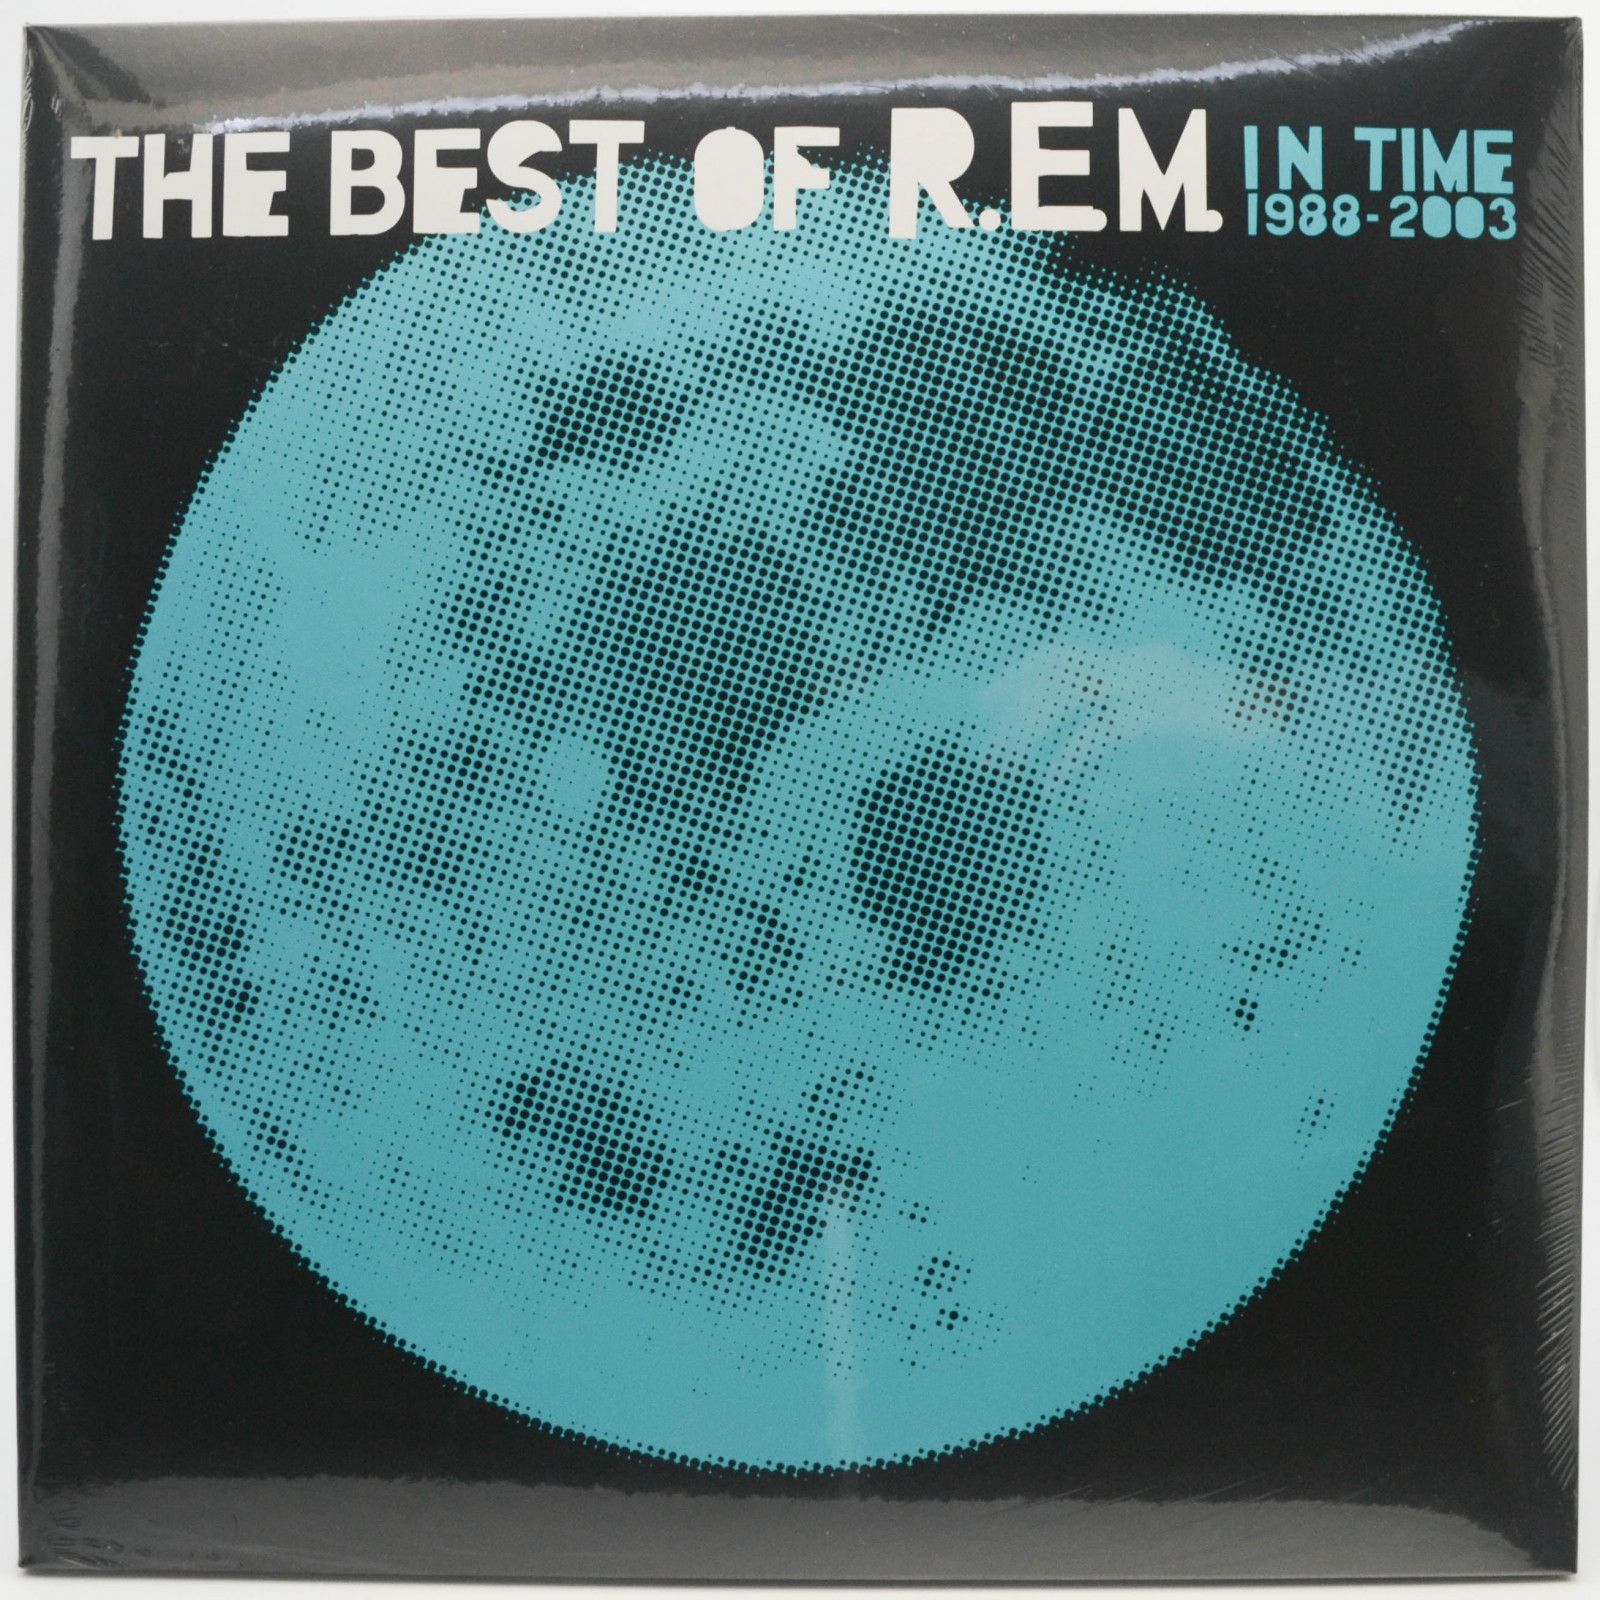 R.E.M. — In Time: The Best Of R.E.M. 1988-2003 (2LP), 2003